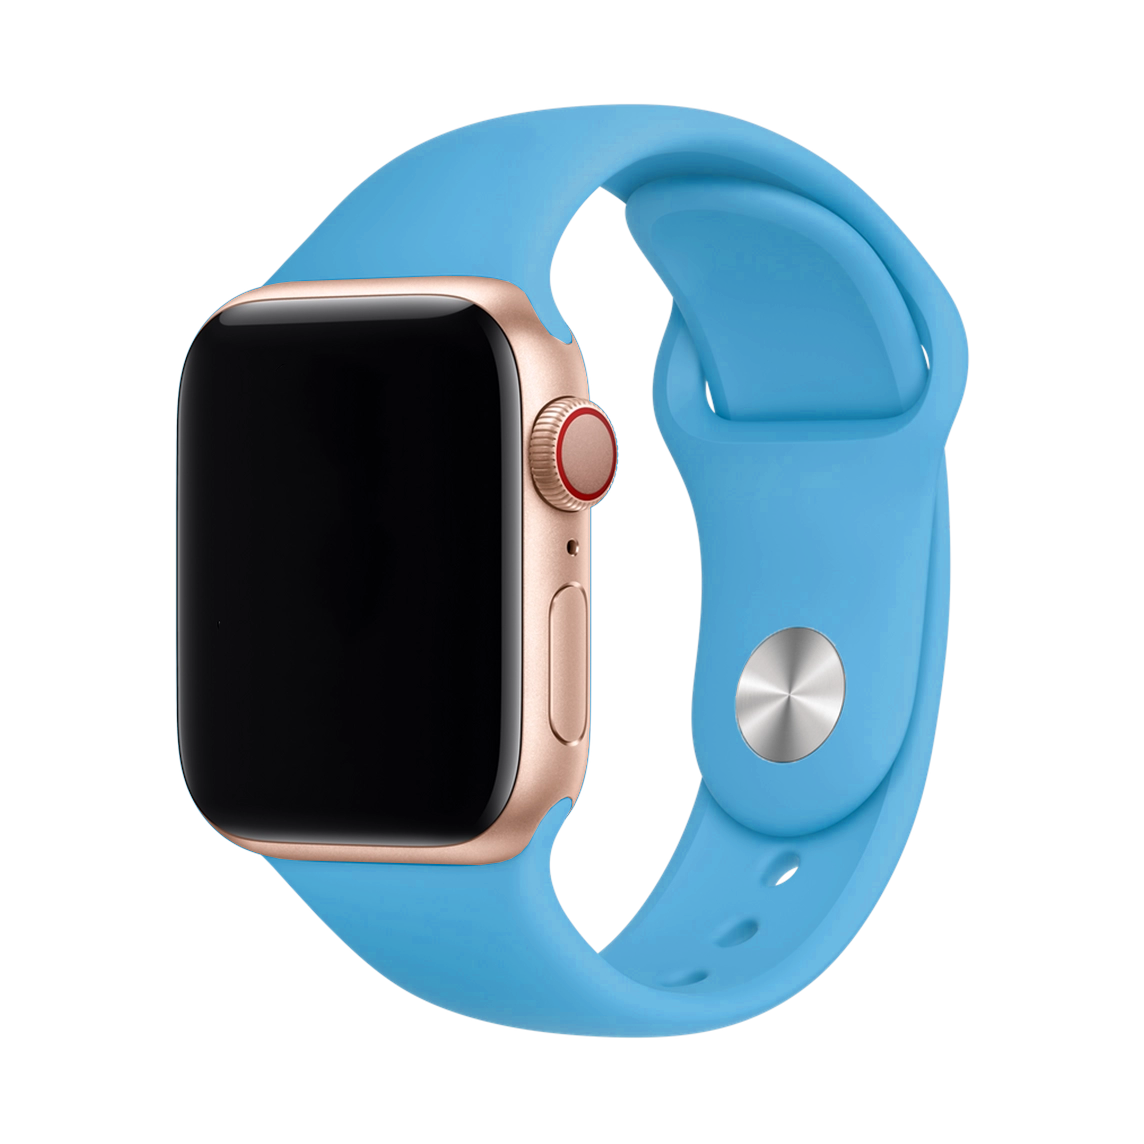 apple-watch-series-3-space-gray-aluminum-case-with-black-sport-band